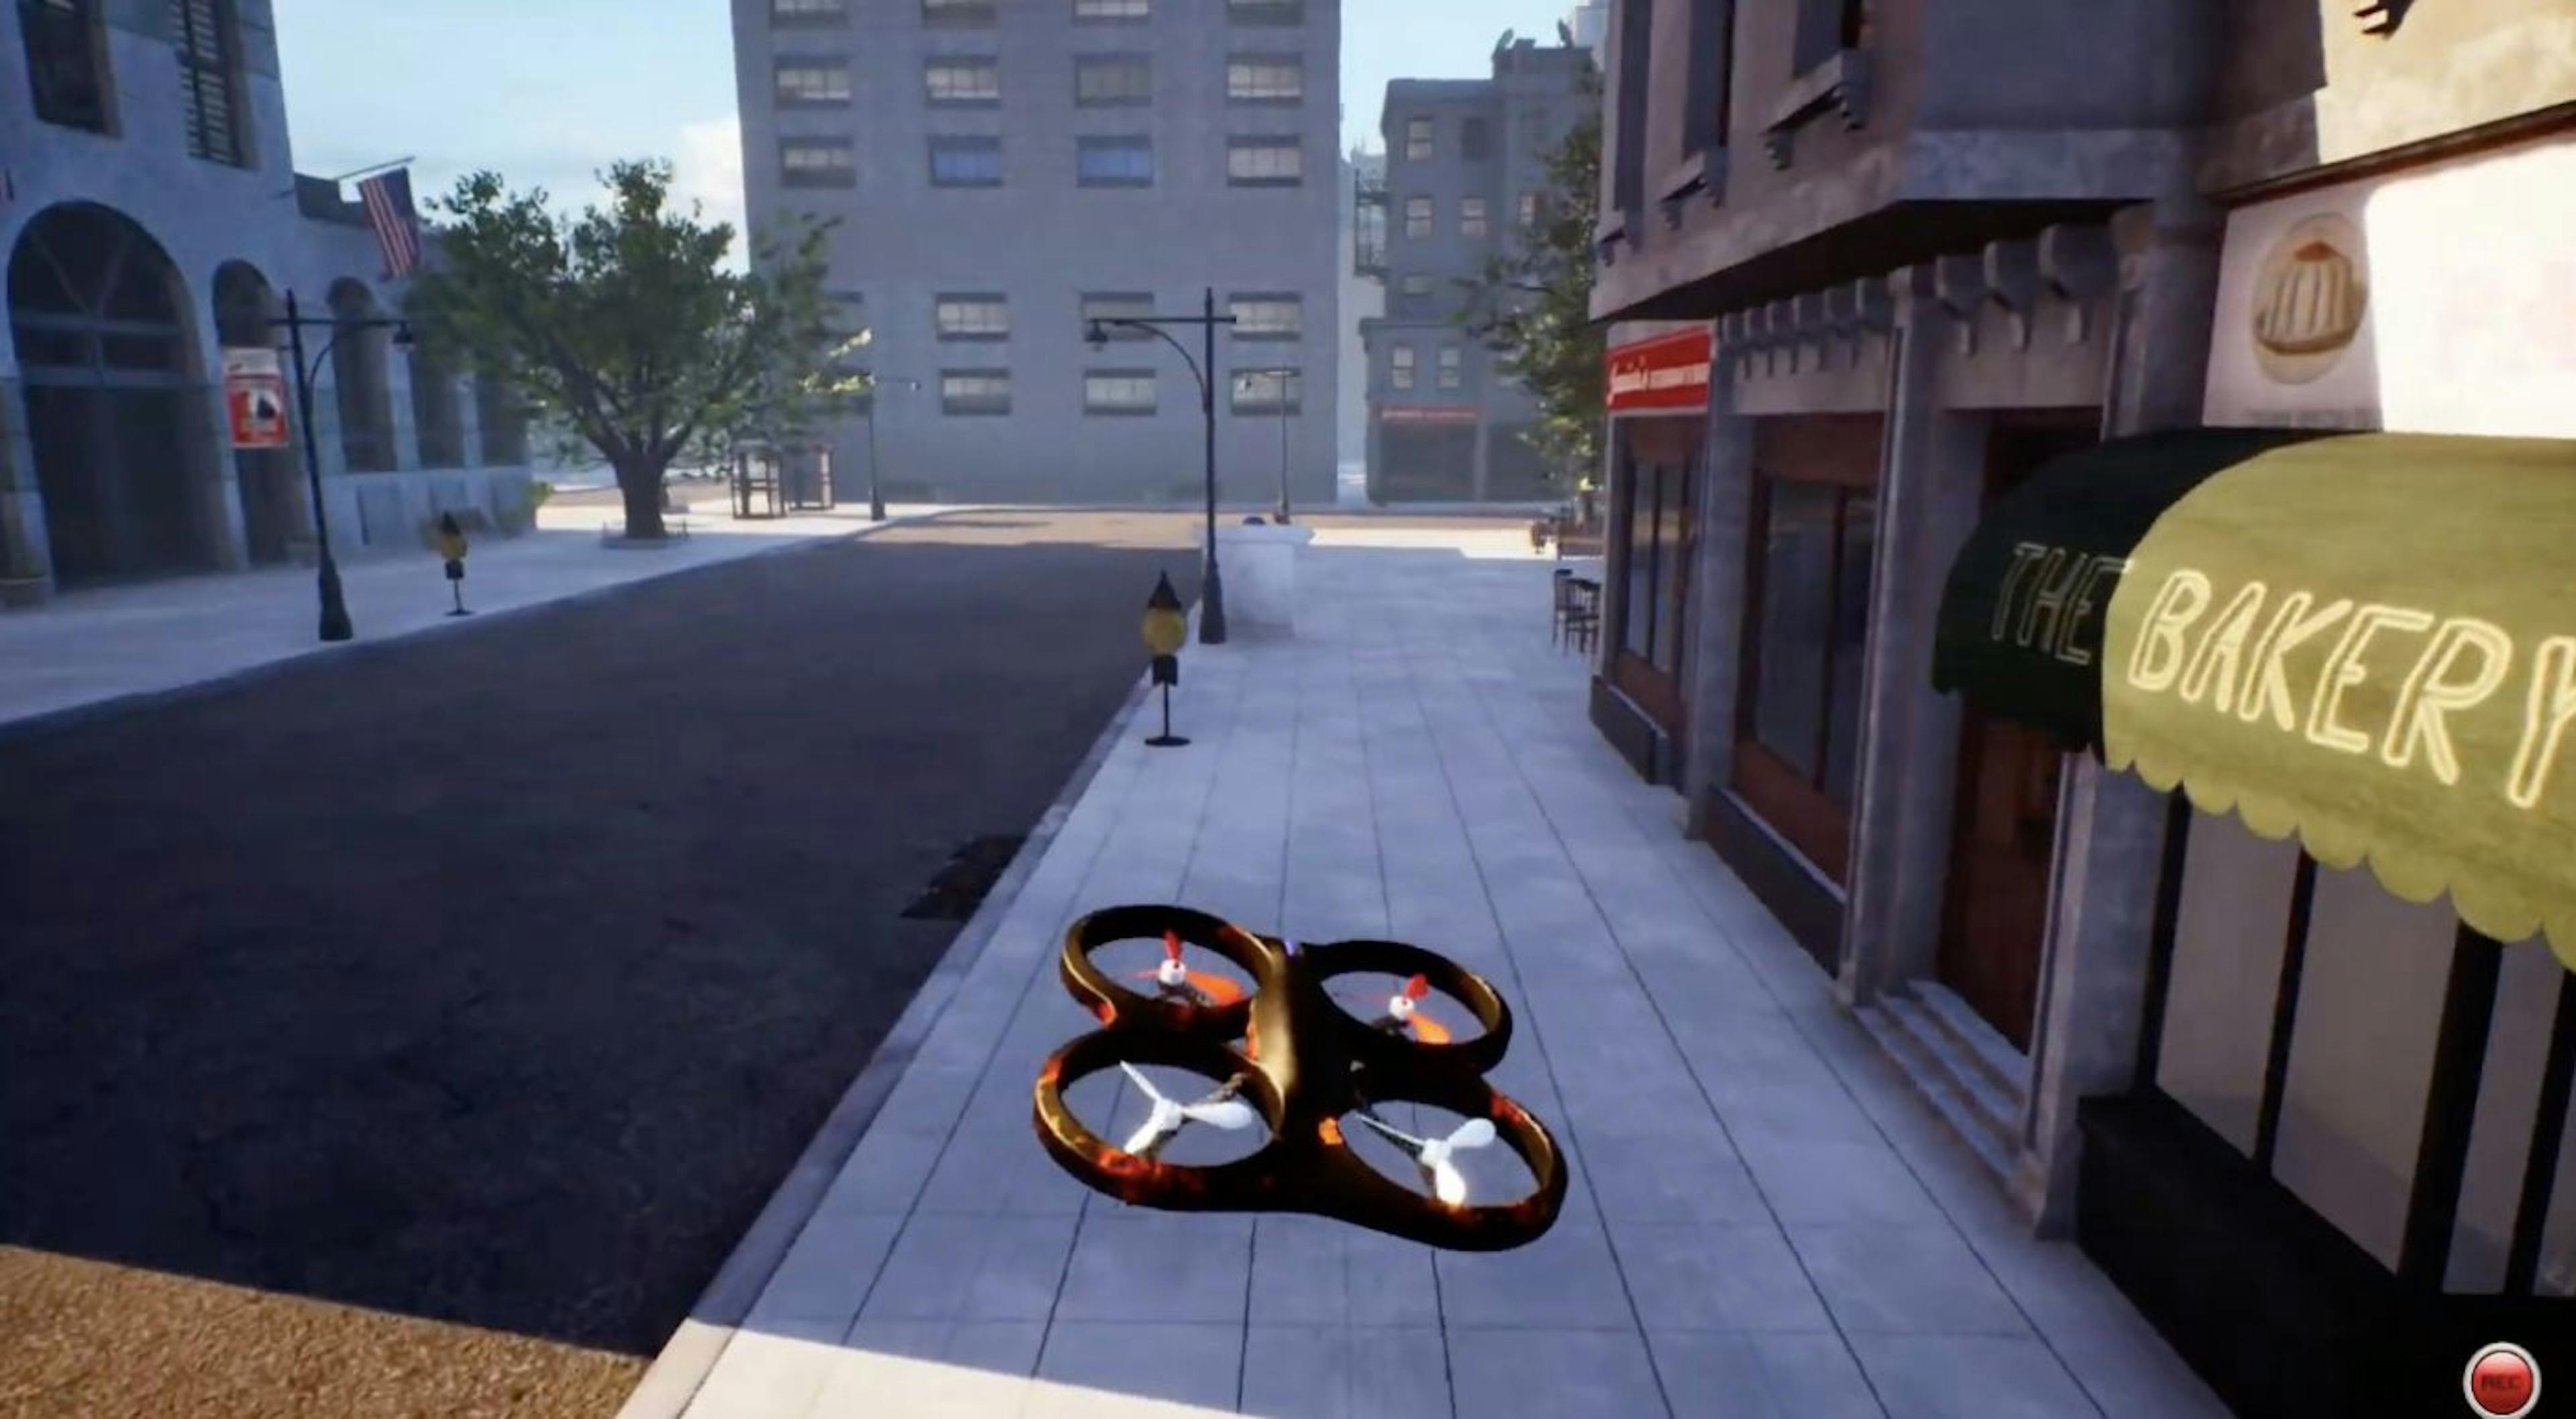 featured image - 5 Reasons Our Cities Are Not Full of Autonomously Flying Drones (Yet!)